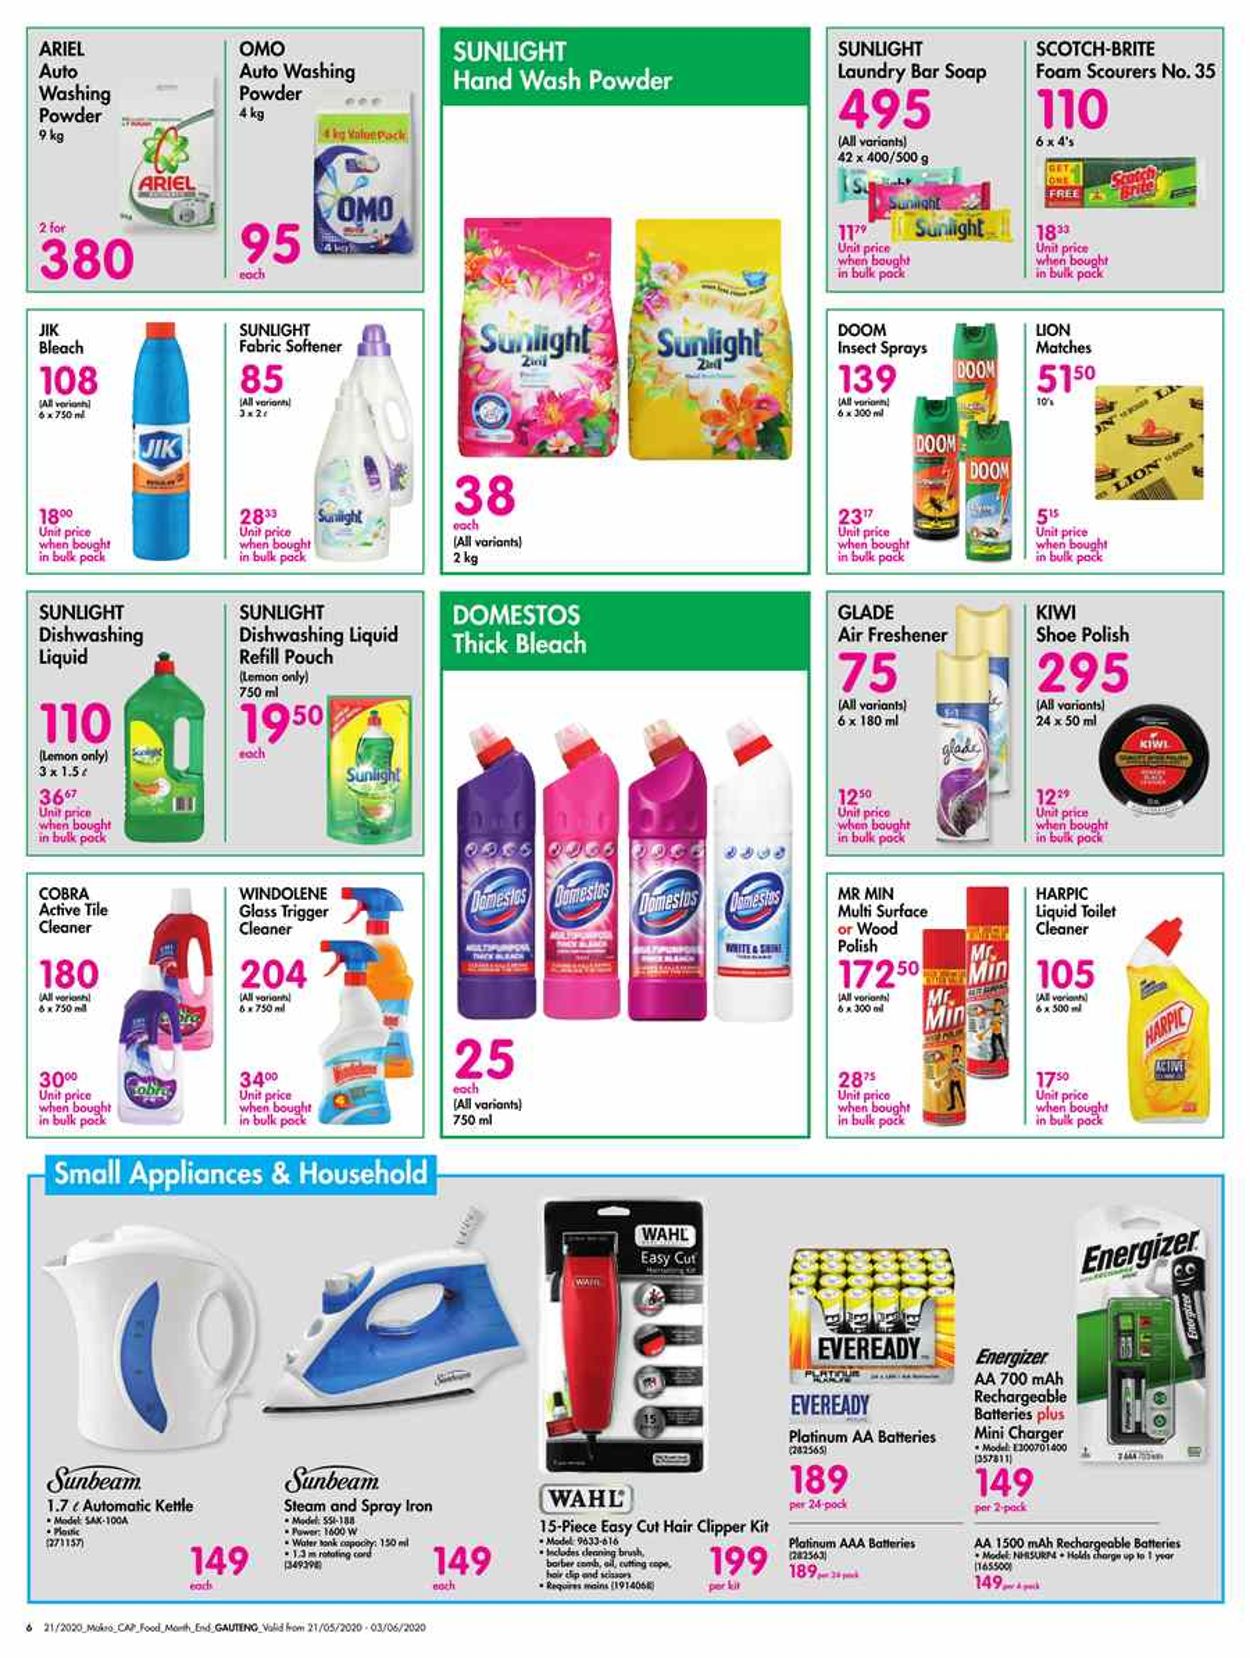 Makro Catalogue from 2020/05/21